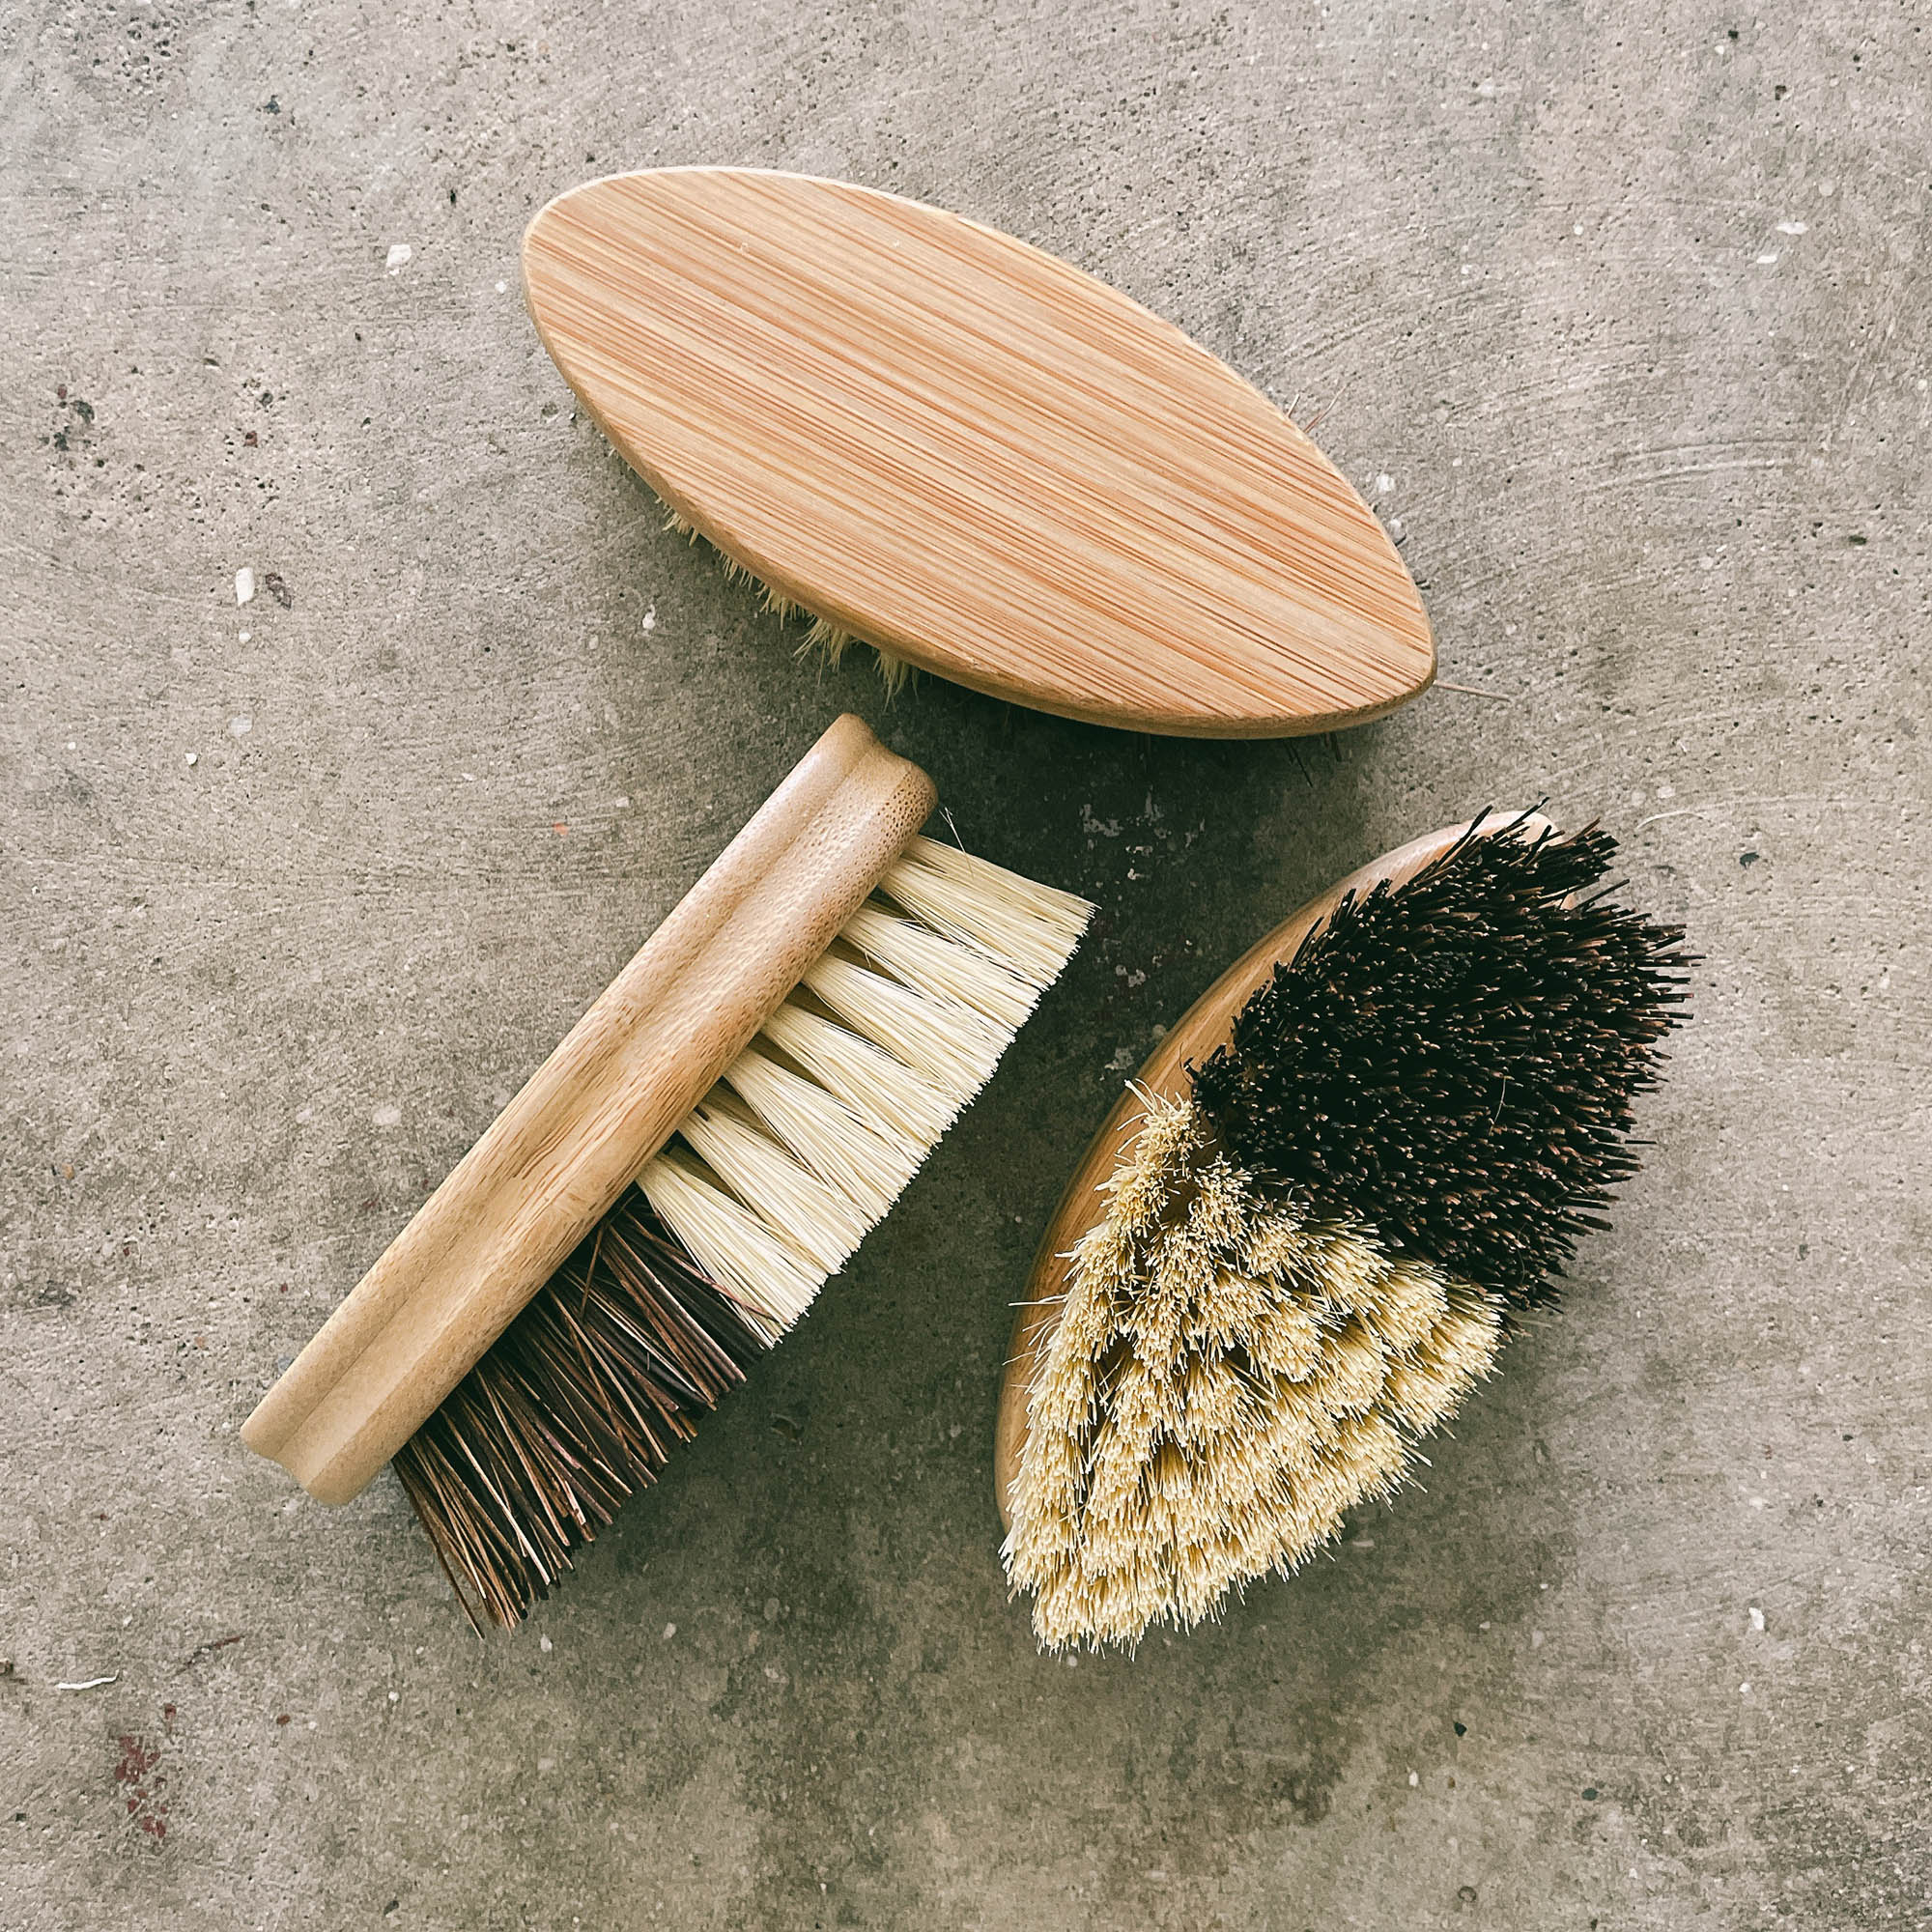 TXV Mart Natural Bamboo Fruits and Vegetable Brush Scrubber with Coconut Fibre and Sisal Bristles | Multi Purpose Bamboo Cleaning Brush | Clean